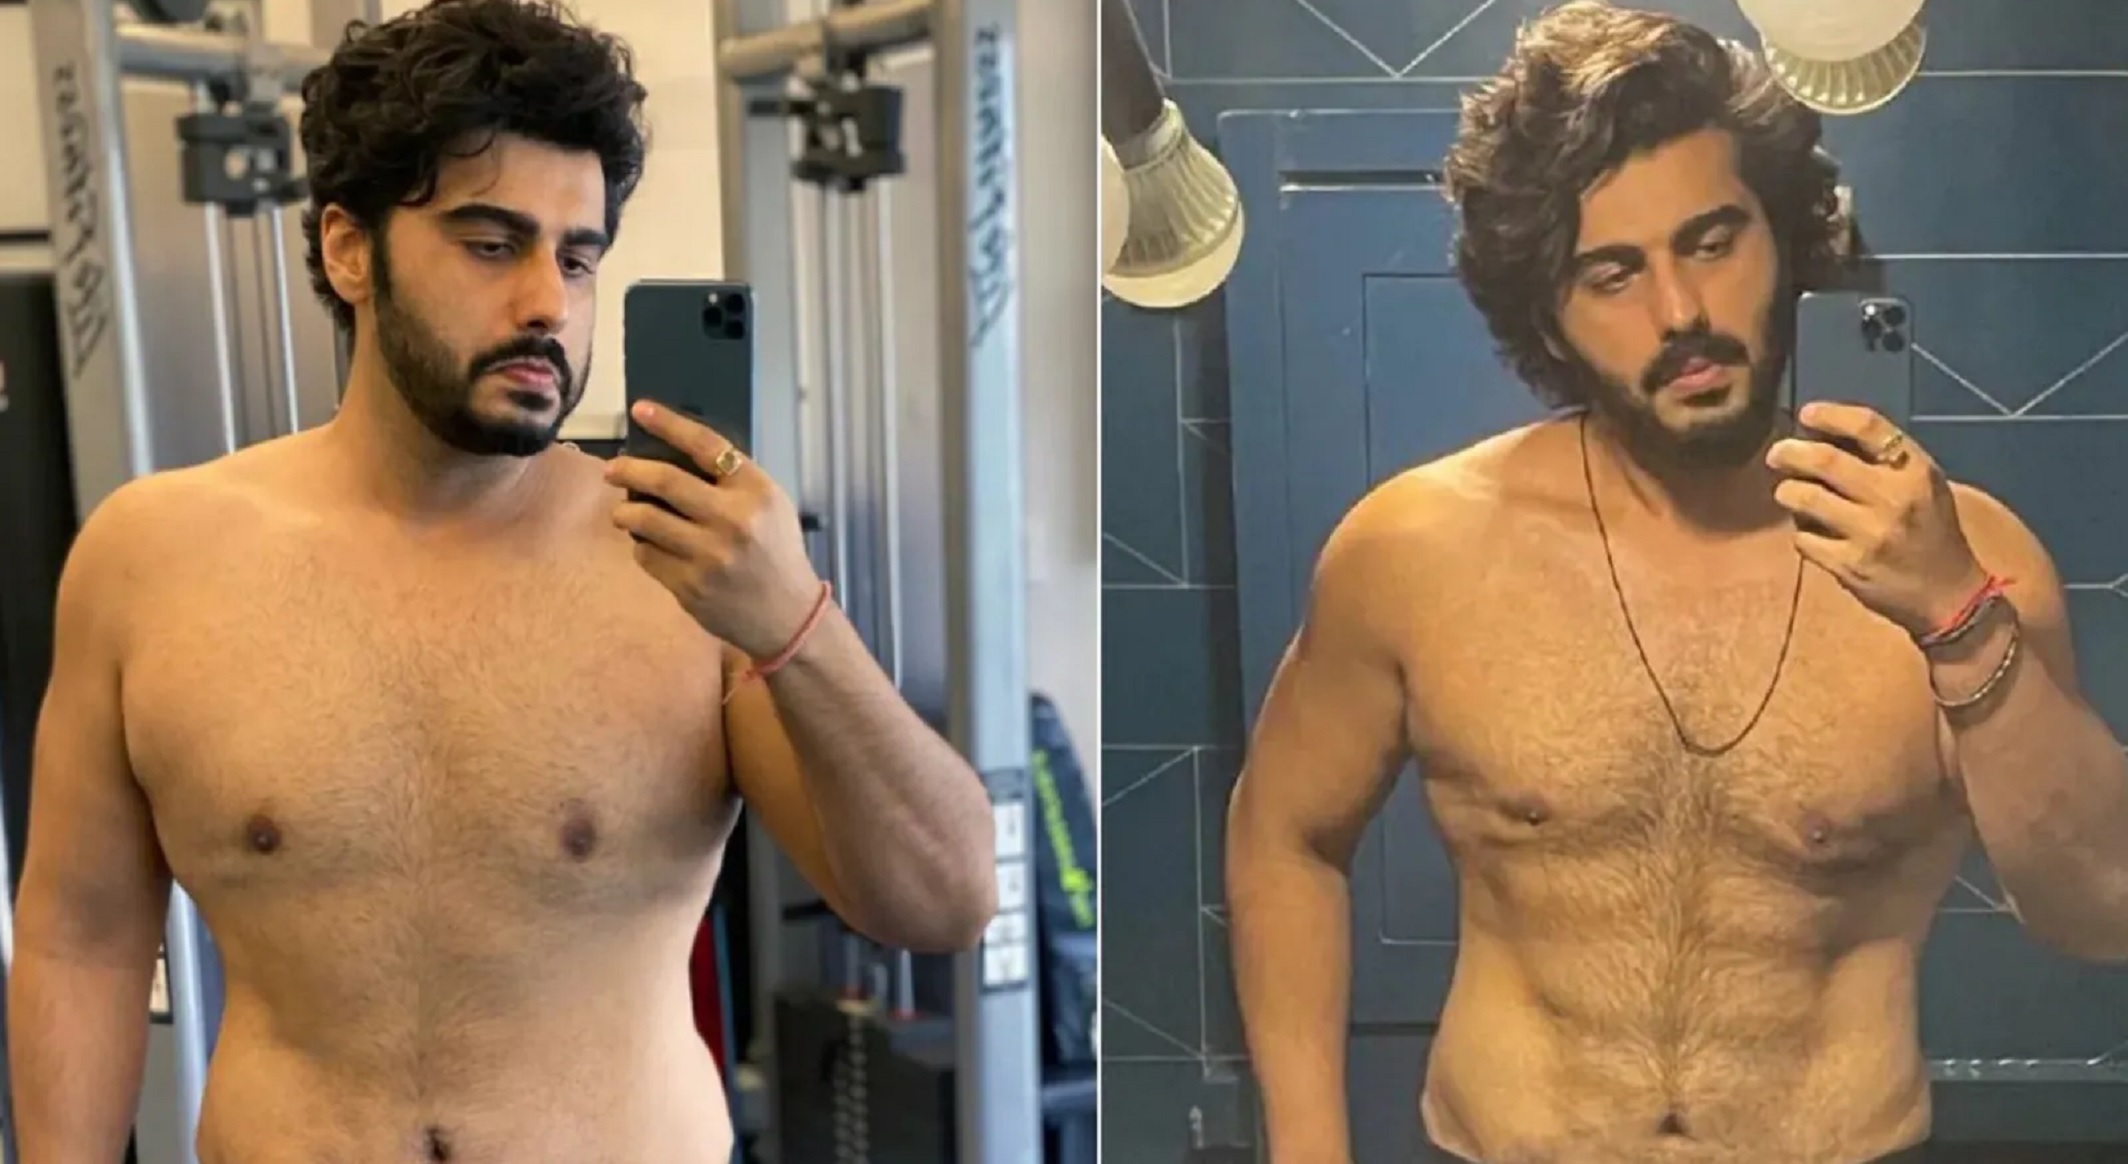 Arjun Kapoor Shares ‘Before and After’ Pictures Of His Physical Transformation: ‘I’m proud of this journey’